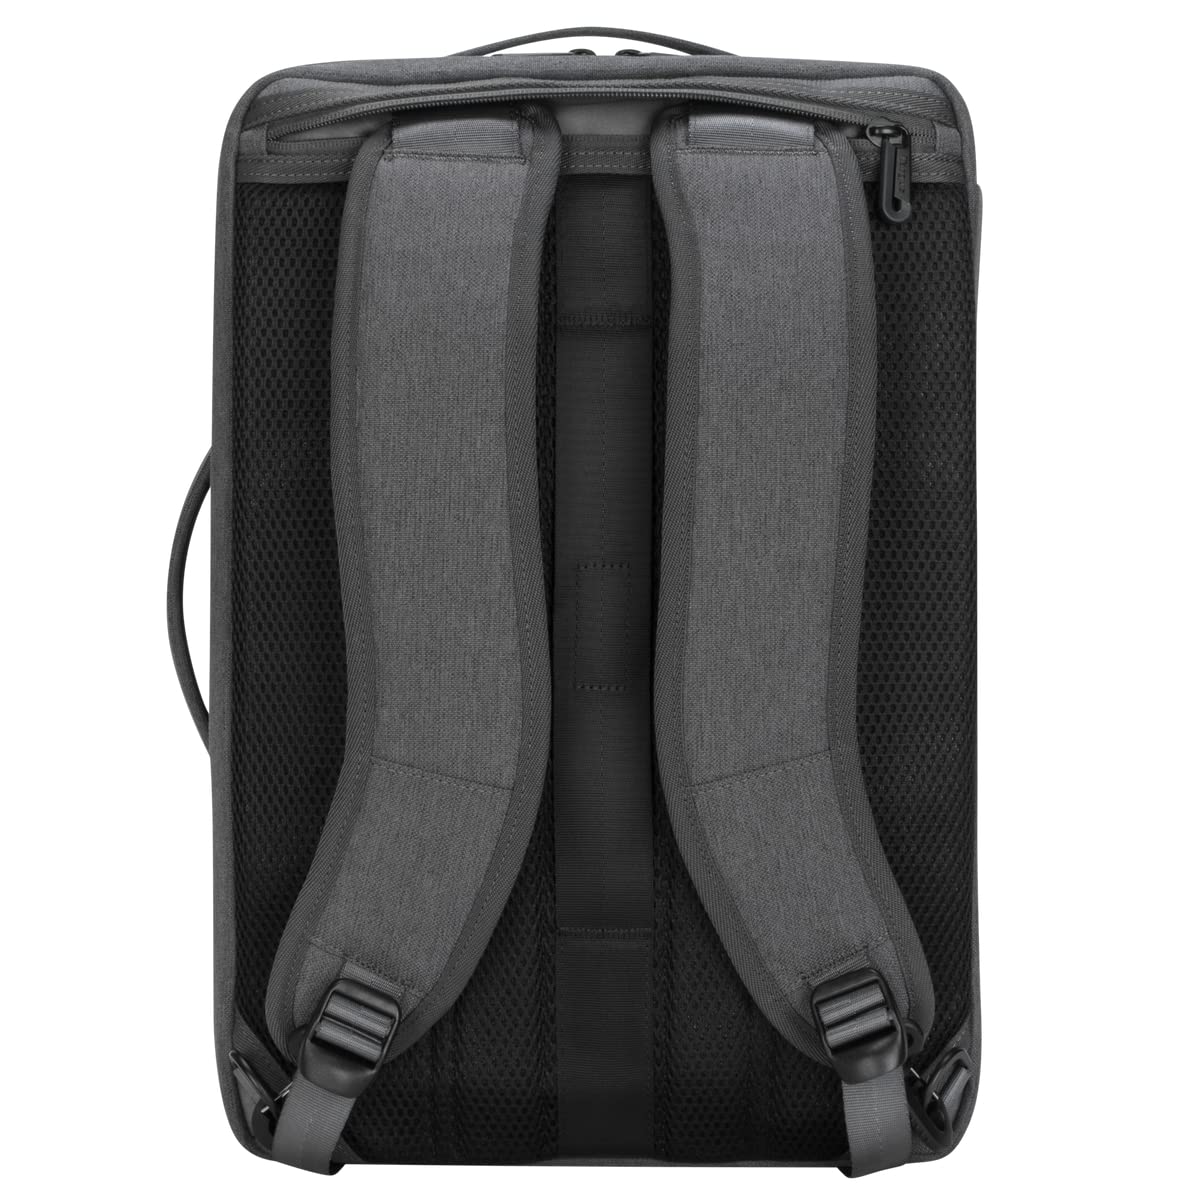 Targus Cypress Convertible Backpack with EcoSmart Designed for Business Traveler and School fit up to 15.6-Inch Laptop/Notebook, Gray (TBB58702GL)